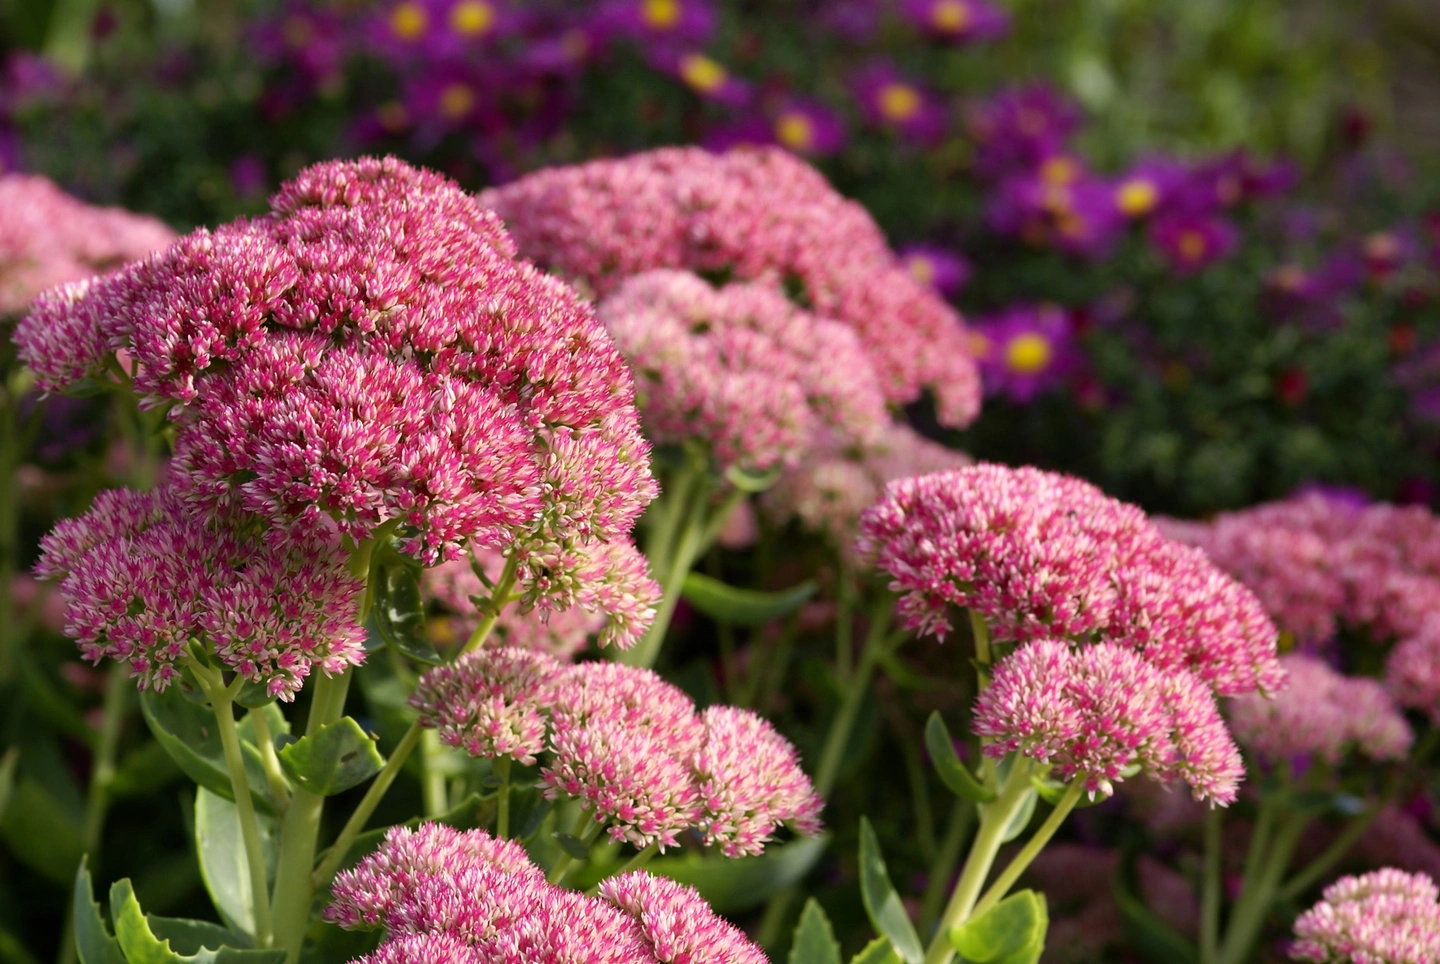 The image shows vibrant pink clustered flowers in focus, with blurred purple flowers in the background, surrounded by green foliage under daylight.